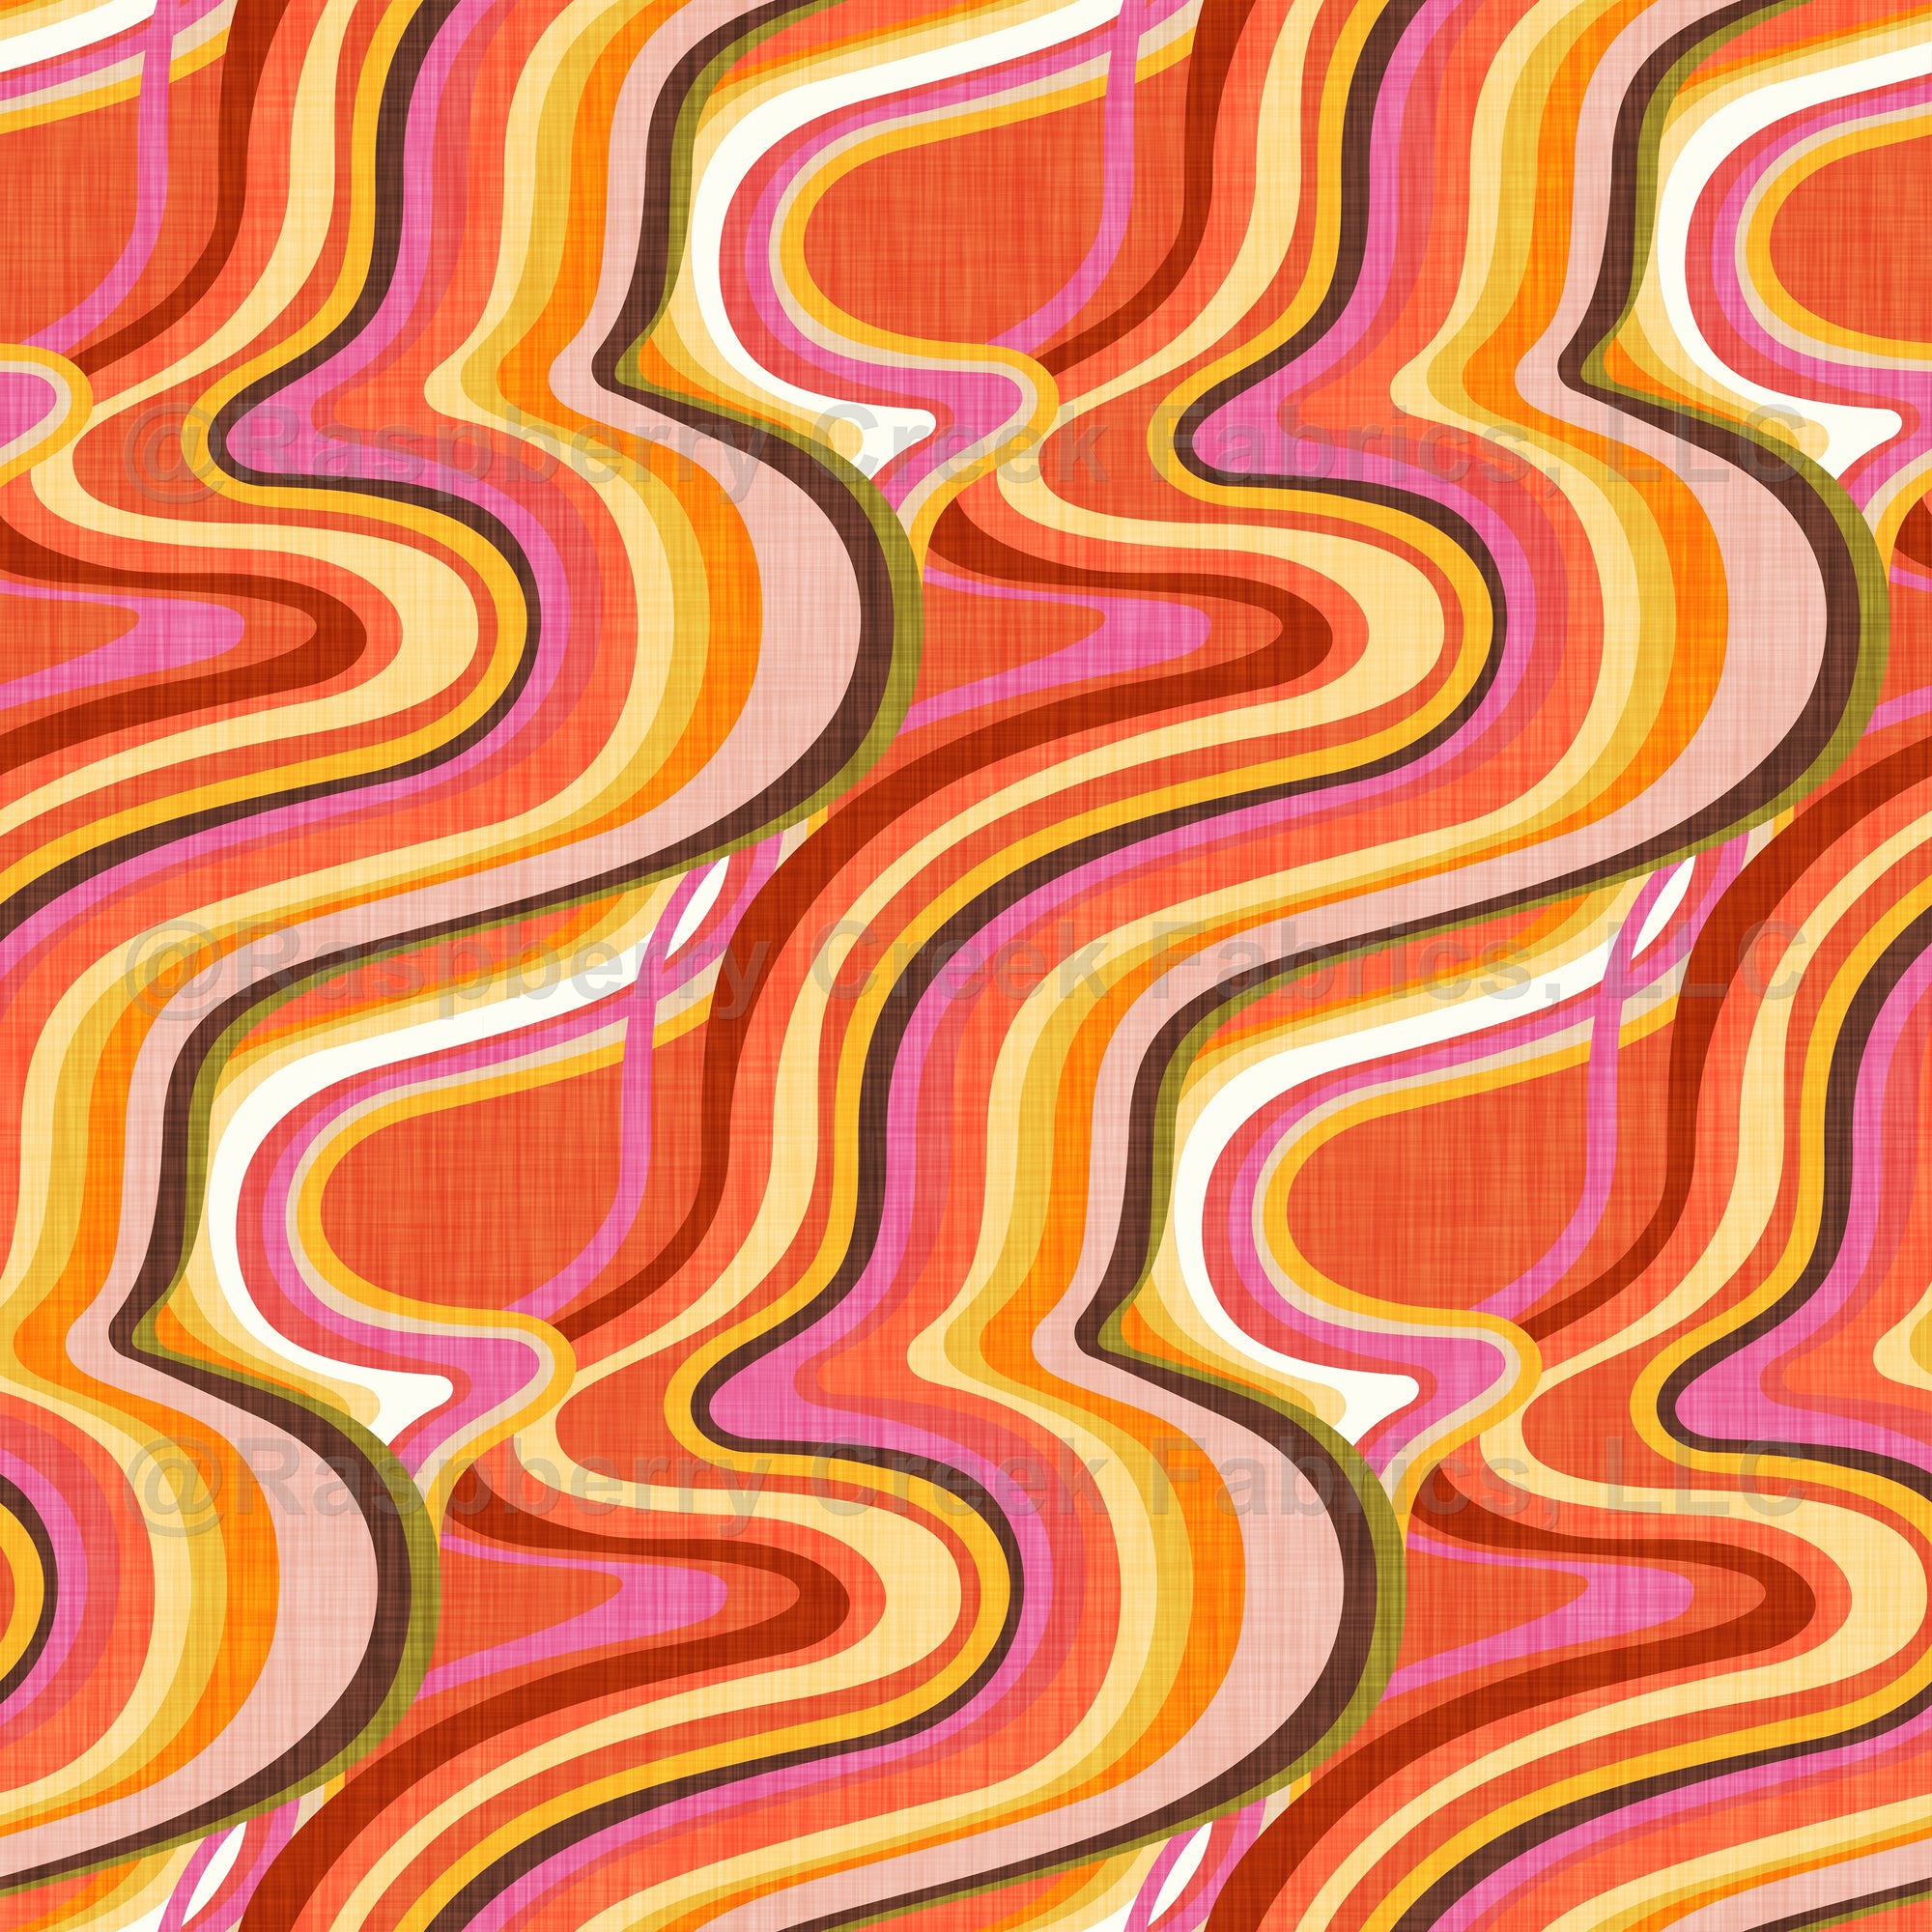 70s Groove - Orange, psychedelic twisted waves Fabric, Raspberry ...